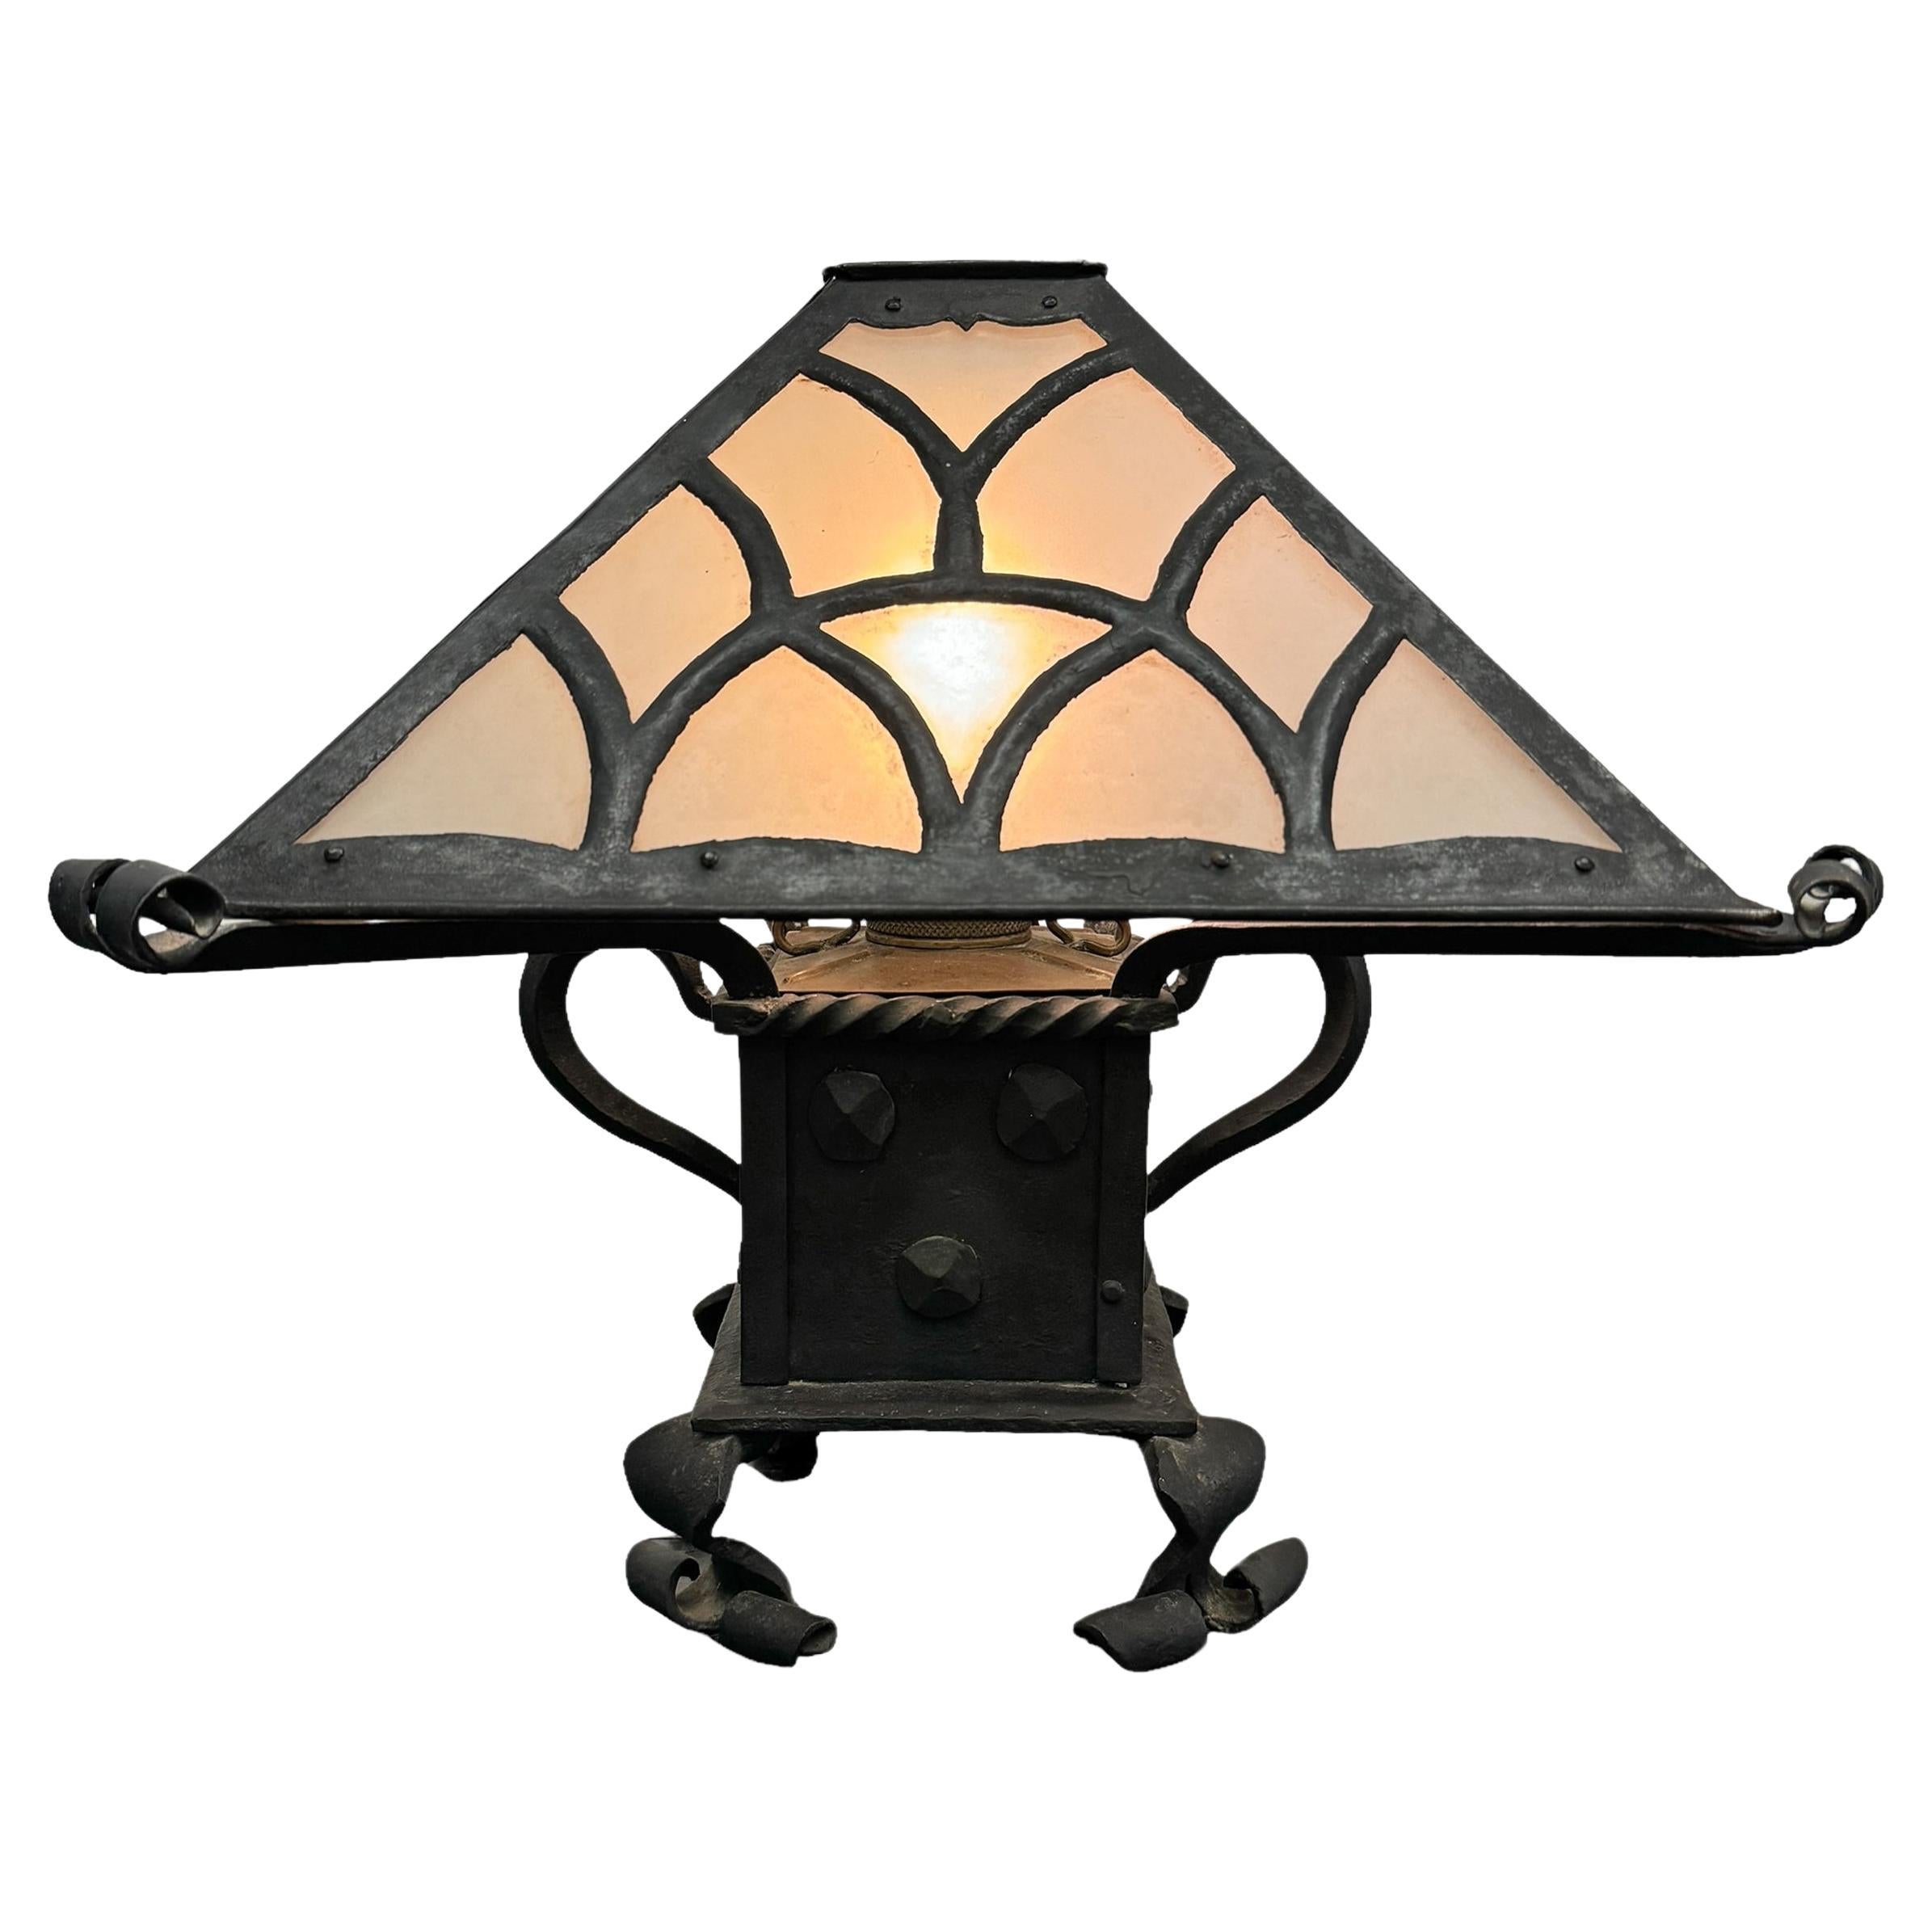 Late 19th/Early 20th Century American Arts and Crafts Wrought Iron Lamp For Sale